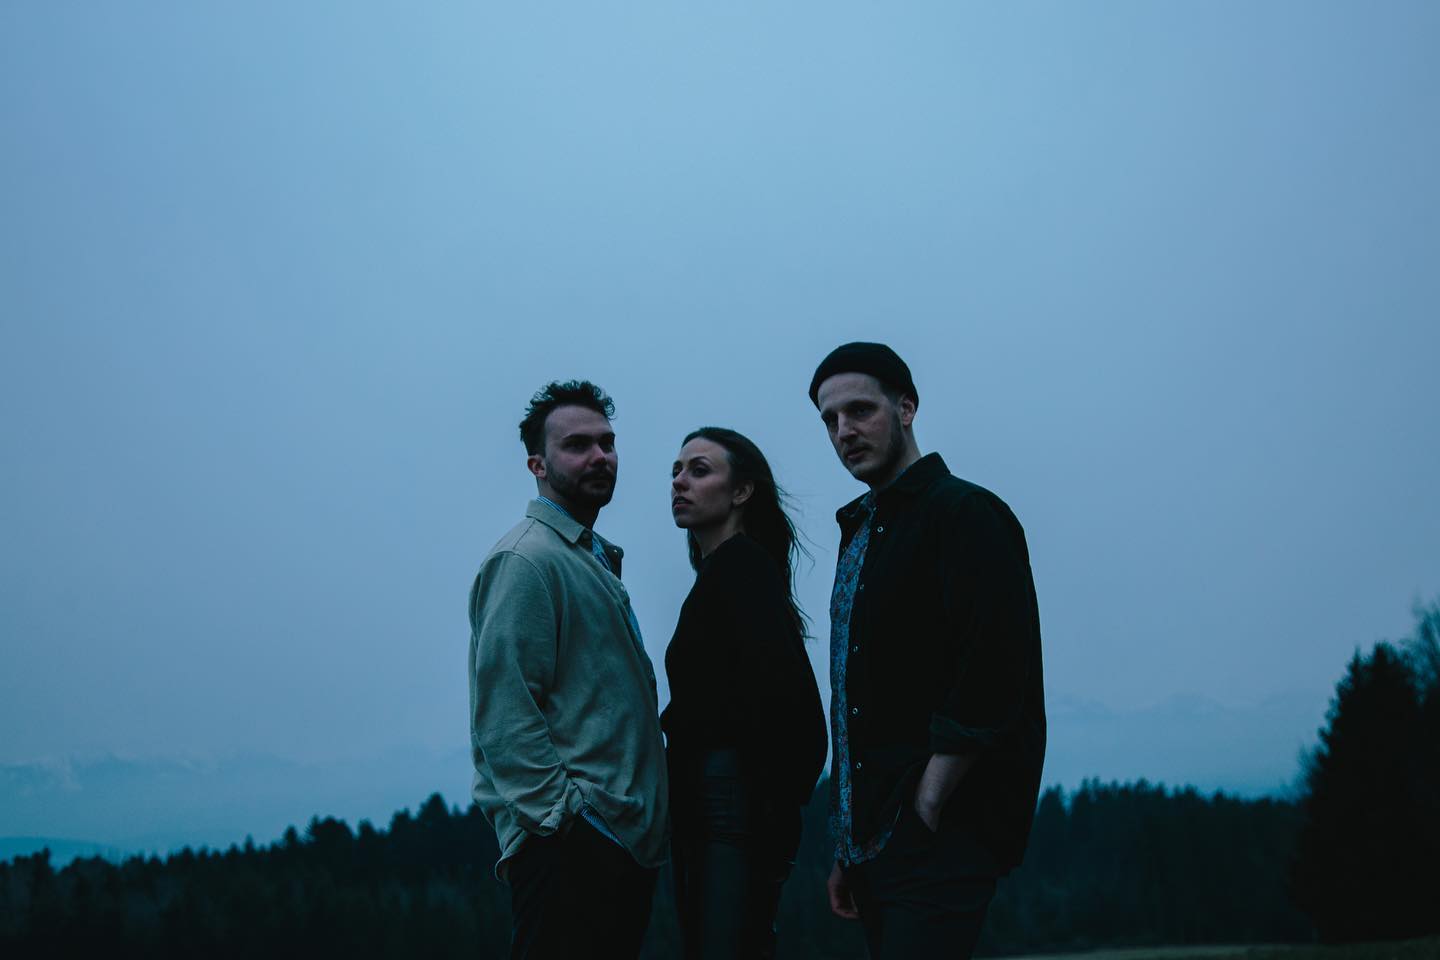 new chapters ahead. 🌌

📷 HEDWIG (thanks for the lovely shooting @summerwashedout 🥰🙏🏽)

#weareava#ava#band#trio#electropop#pop#swiss#switzerland#newcomer#news#newchapter#comingsoon#outdoor#vibe#raw#synth#indie#landscape#music#stgallen#ostschweiz